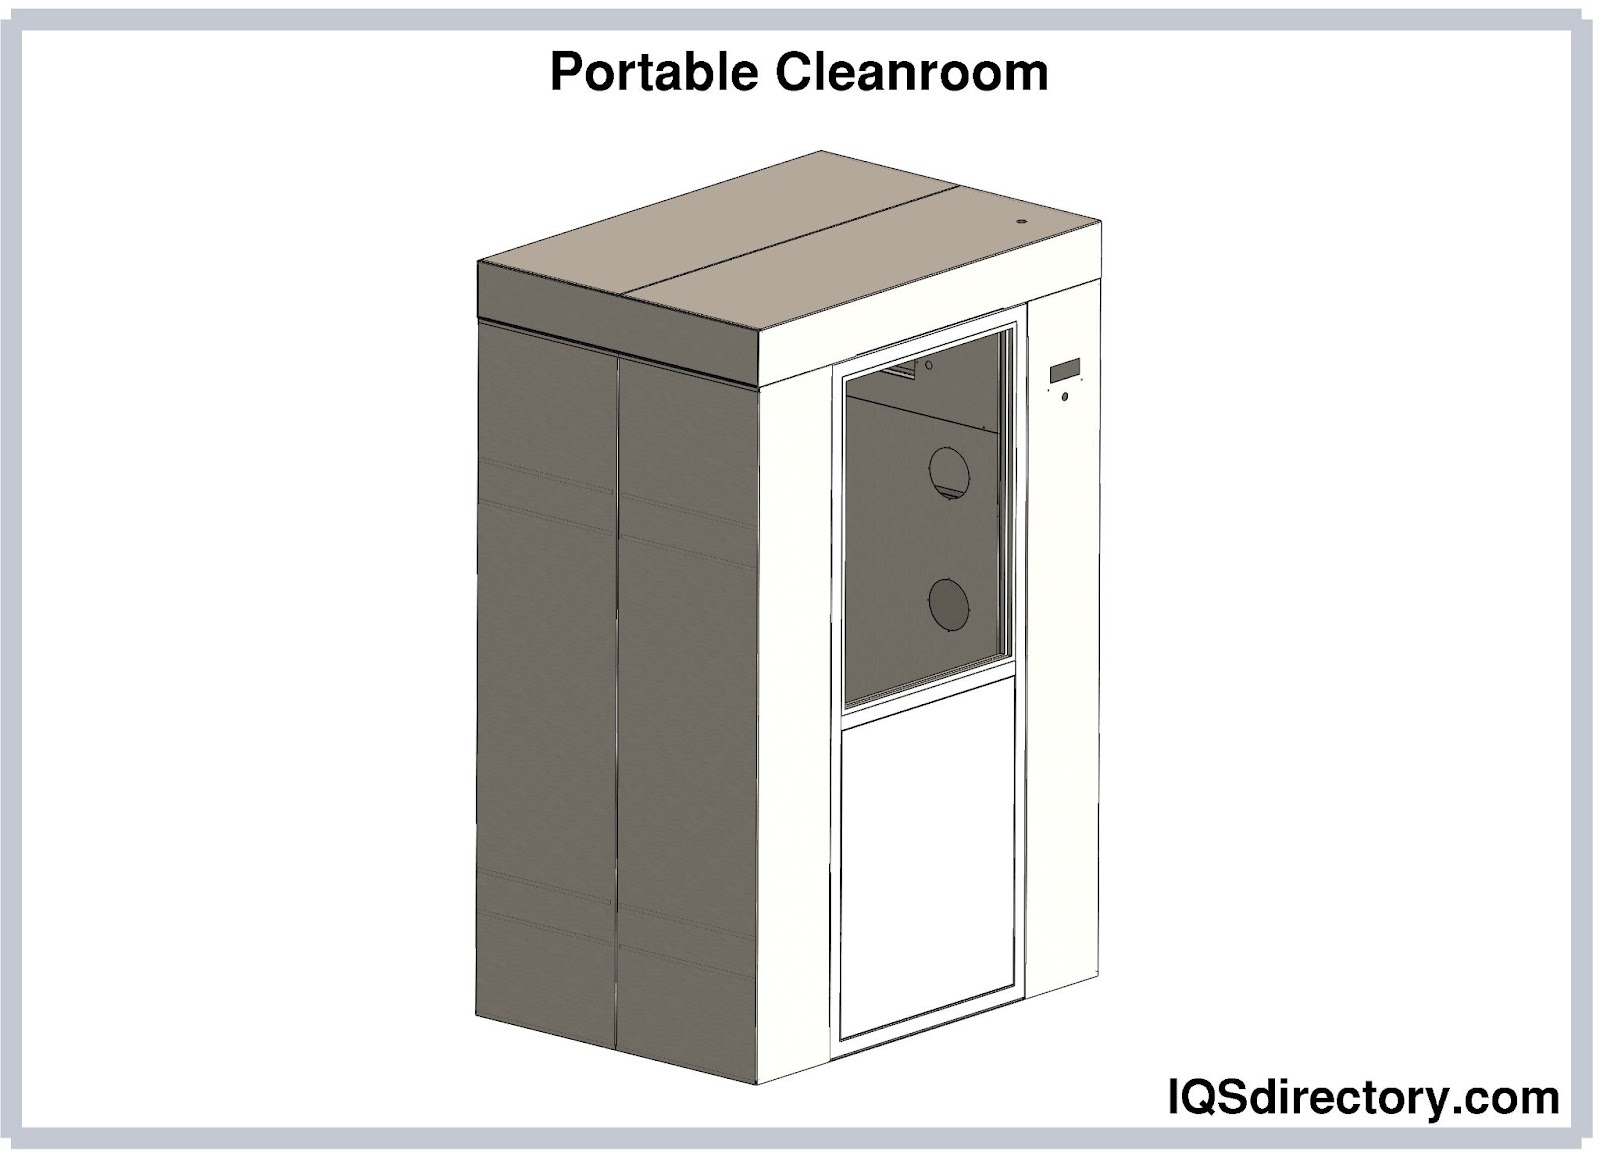 Portable Cleanroom